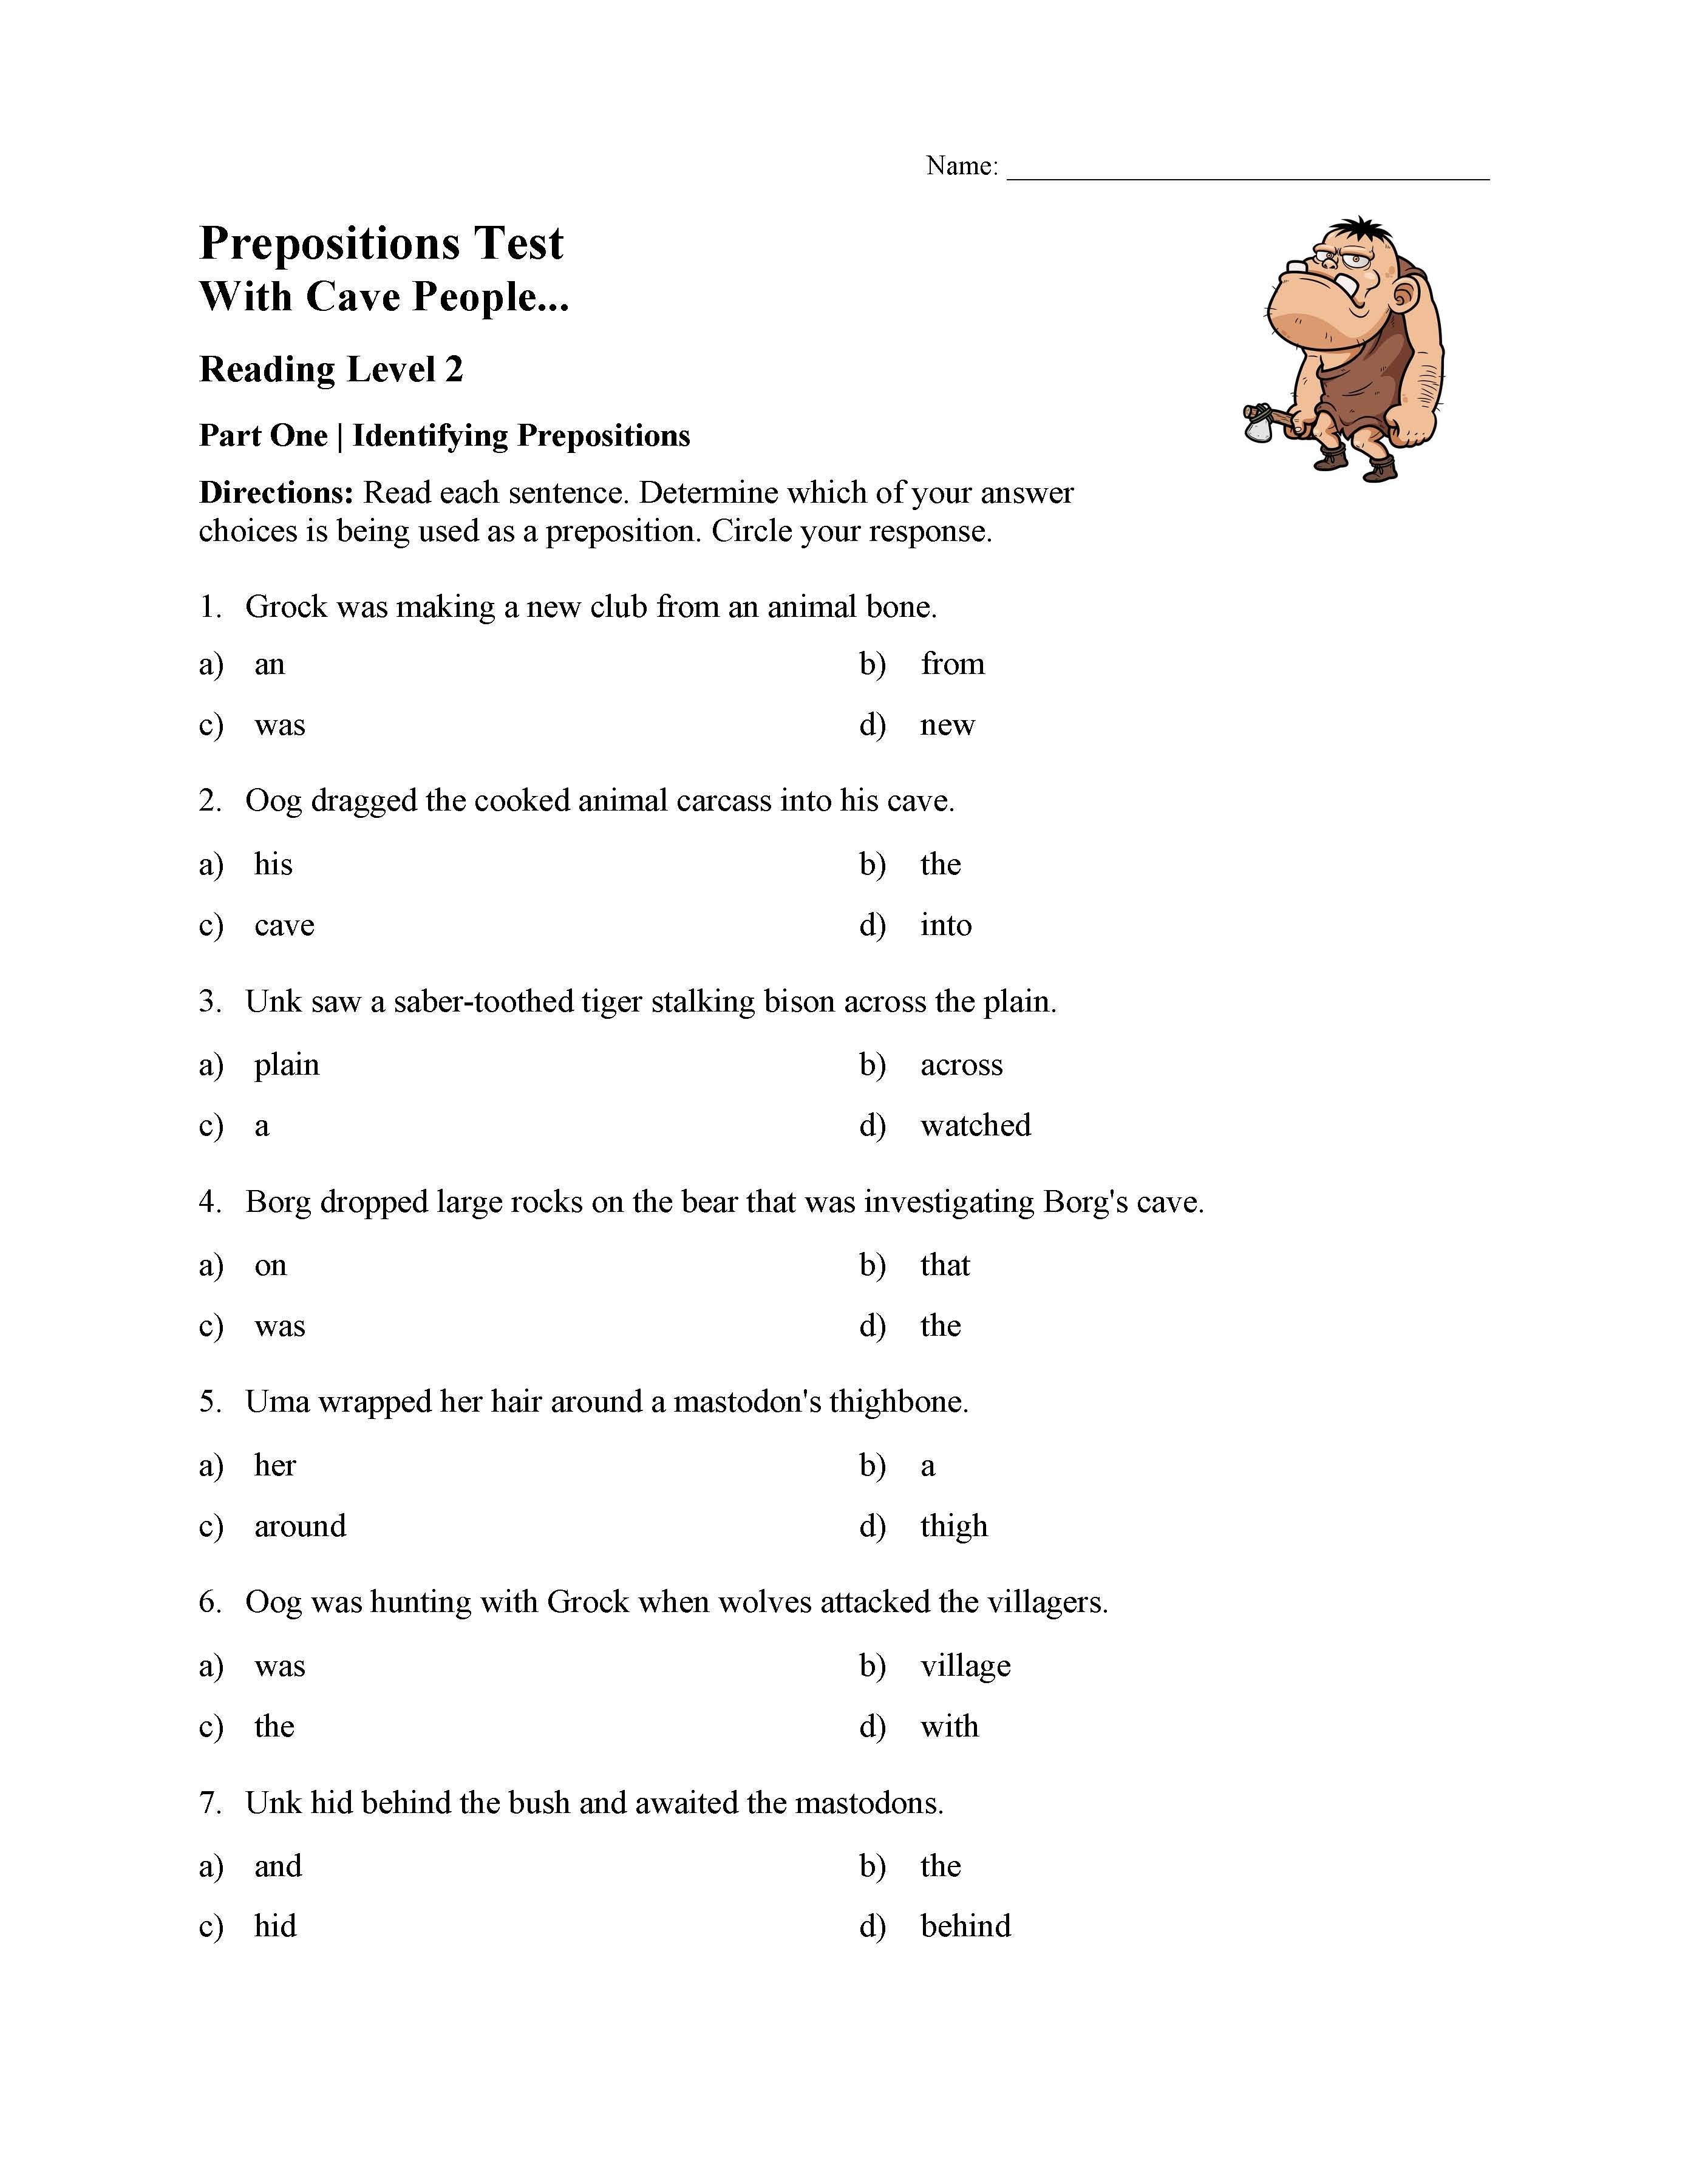 This is a preview image of the Prepositions Test 1 - Reading Level 2.